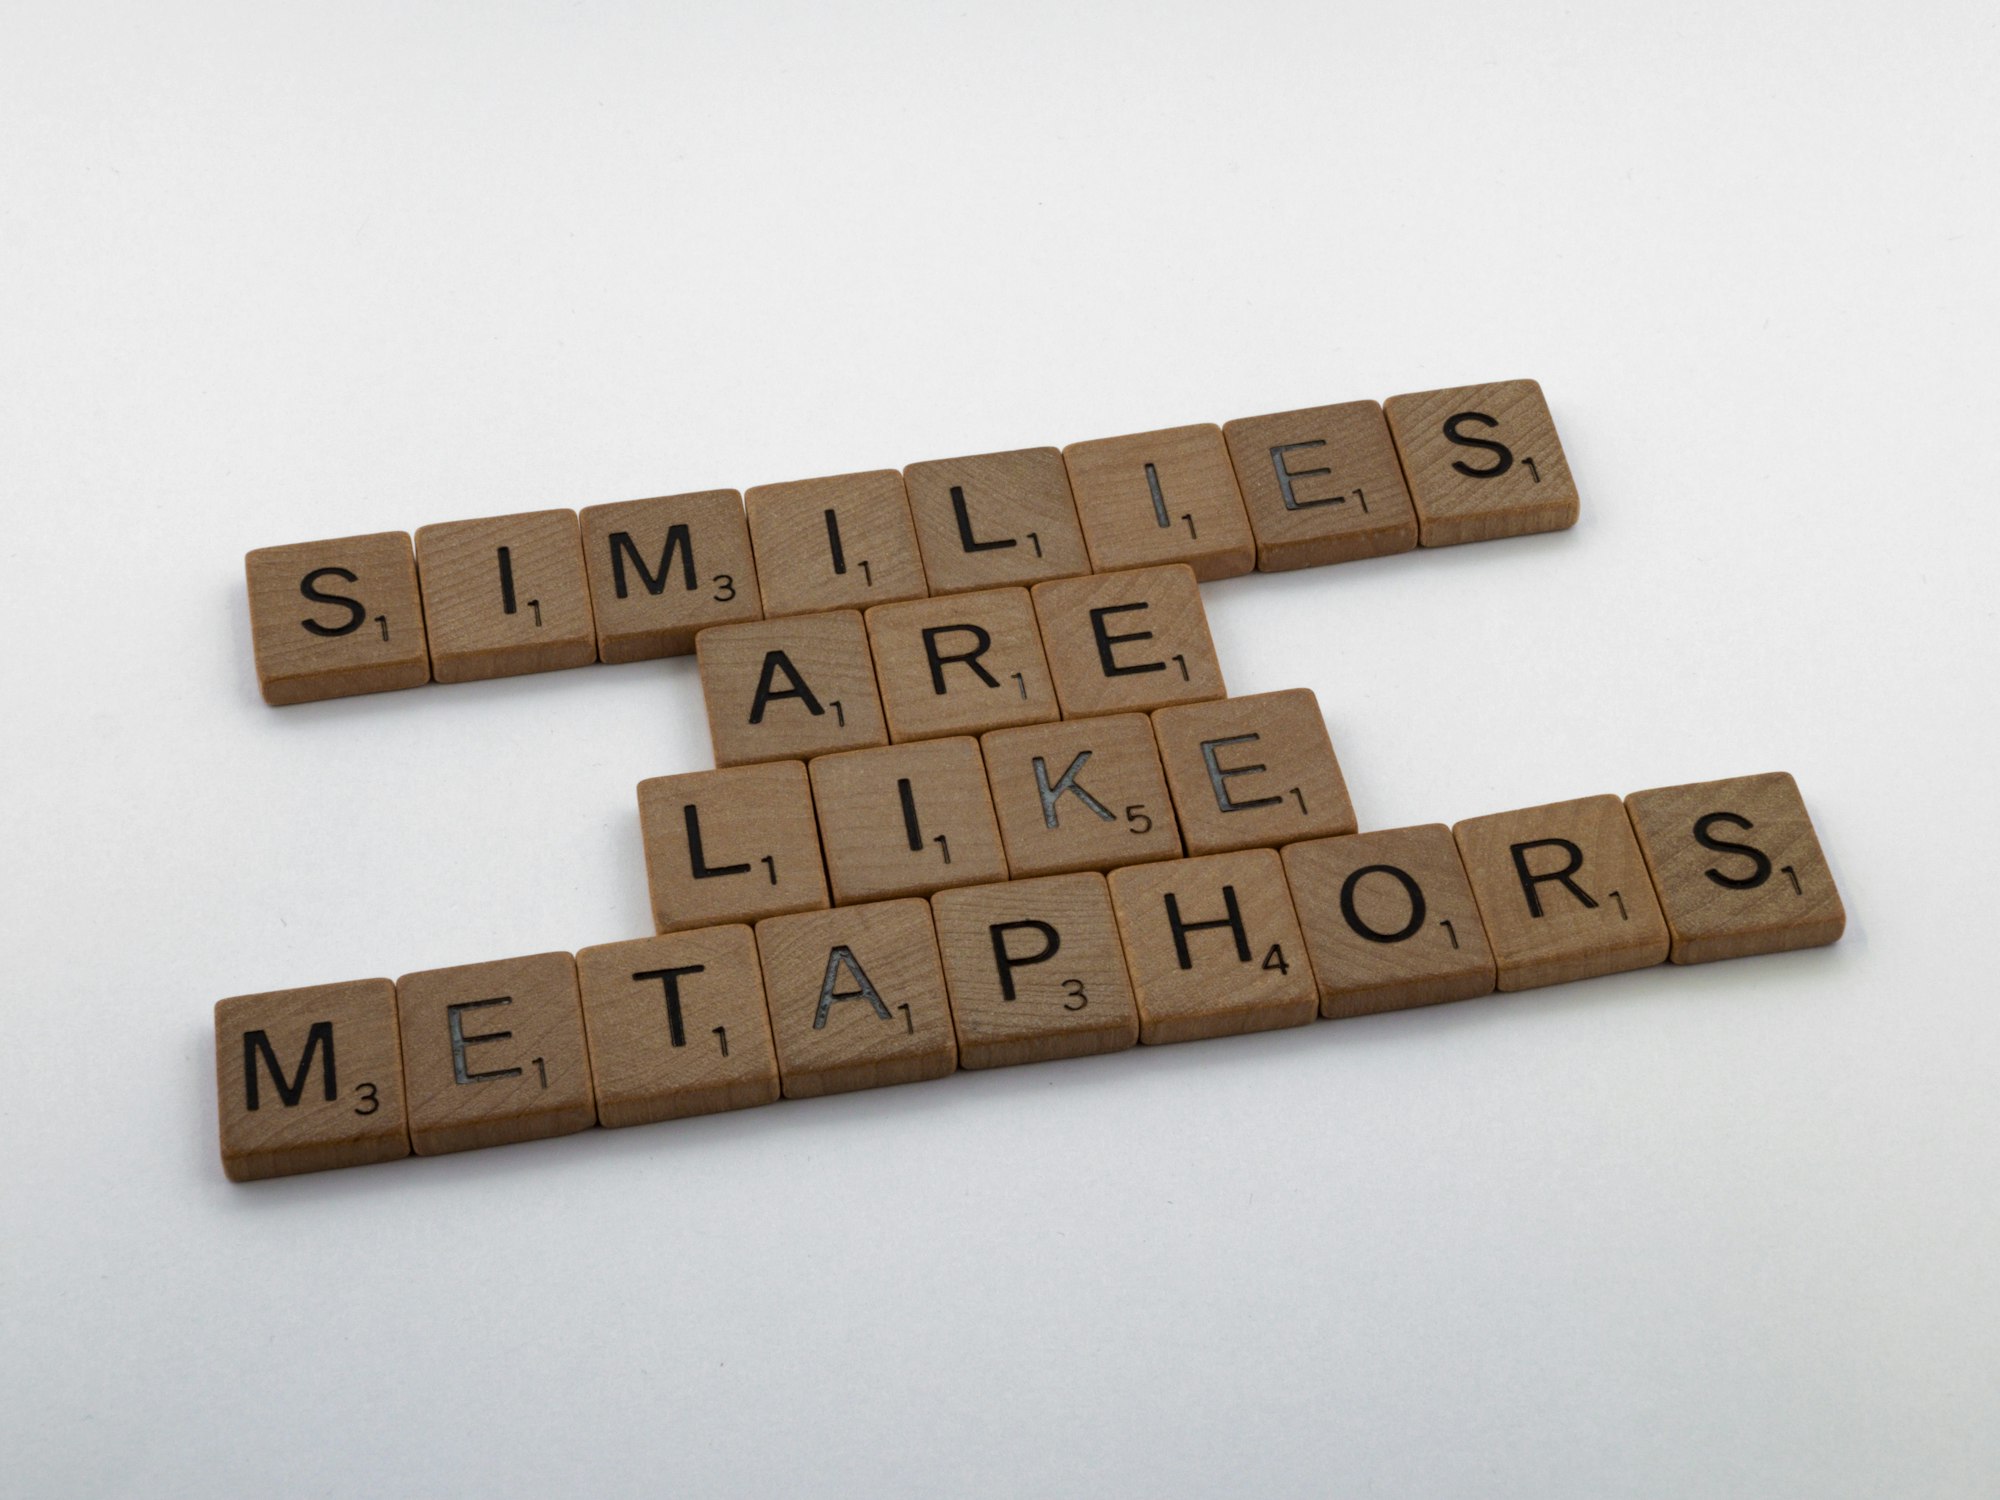 scrabble, scrabble pieces, lettering, letters, wood, scrabble tiles, white background, words, quote, letters, type, typography, design, layout, similes are like metaphors, simile, metaphor, similitude, like, similar, similarity, grammar, words, analogy, comparison, homology, parallel, semblance, likeness, like, correspondence, 